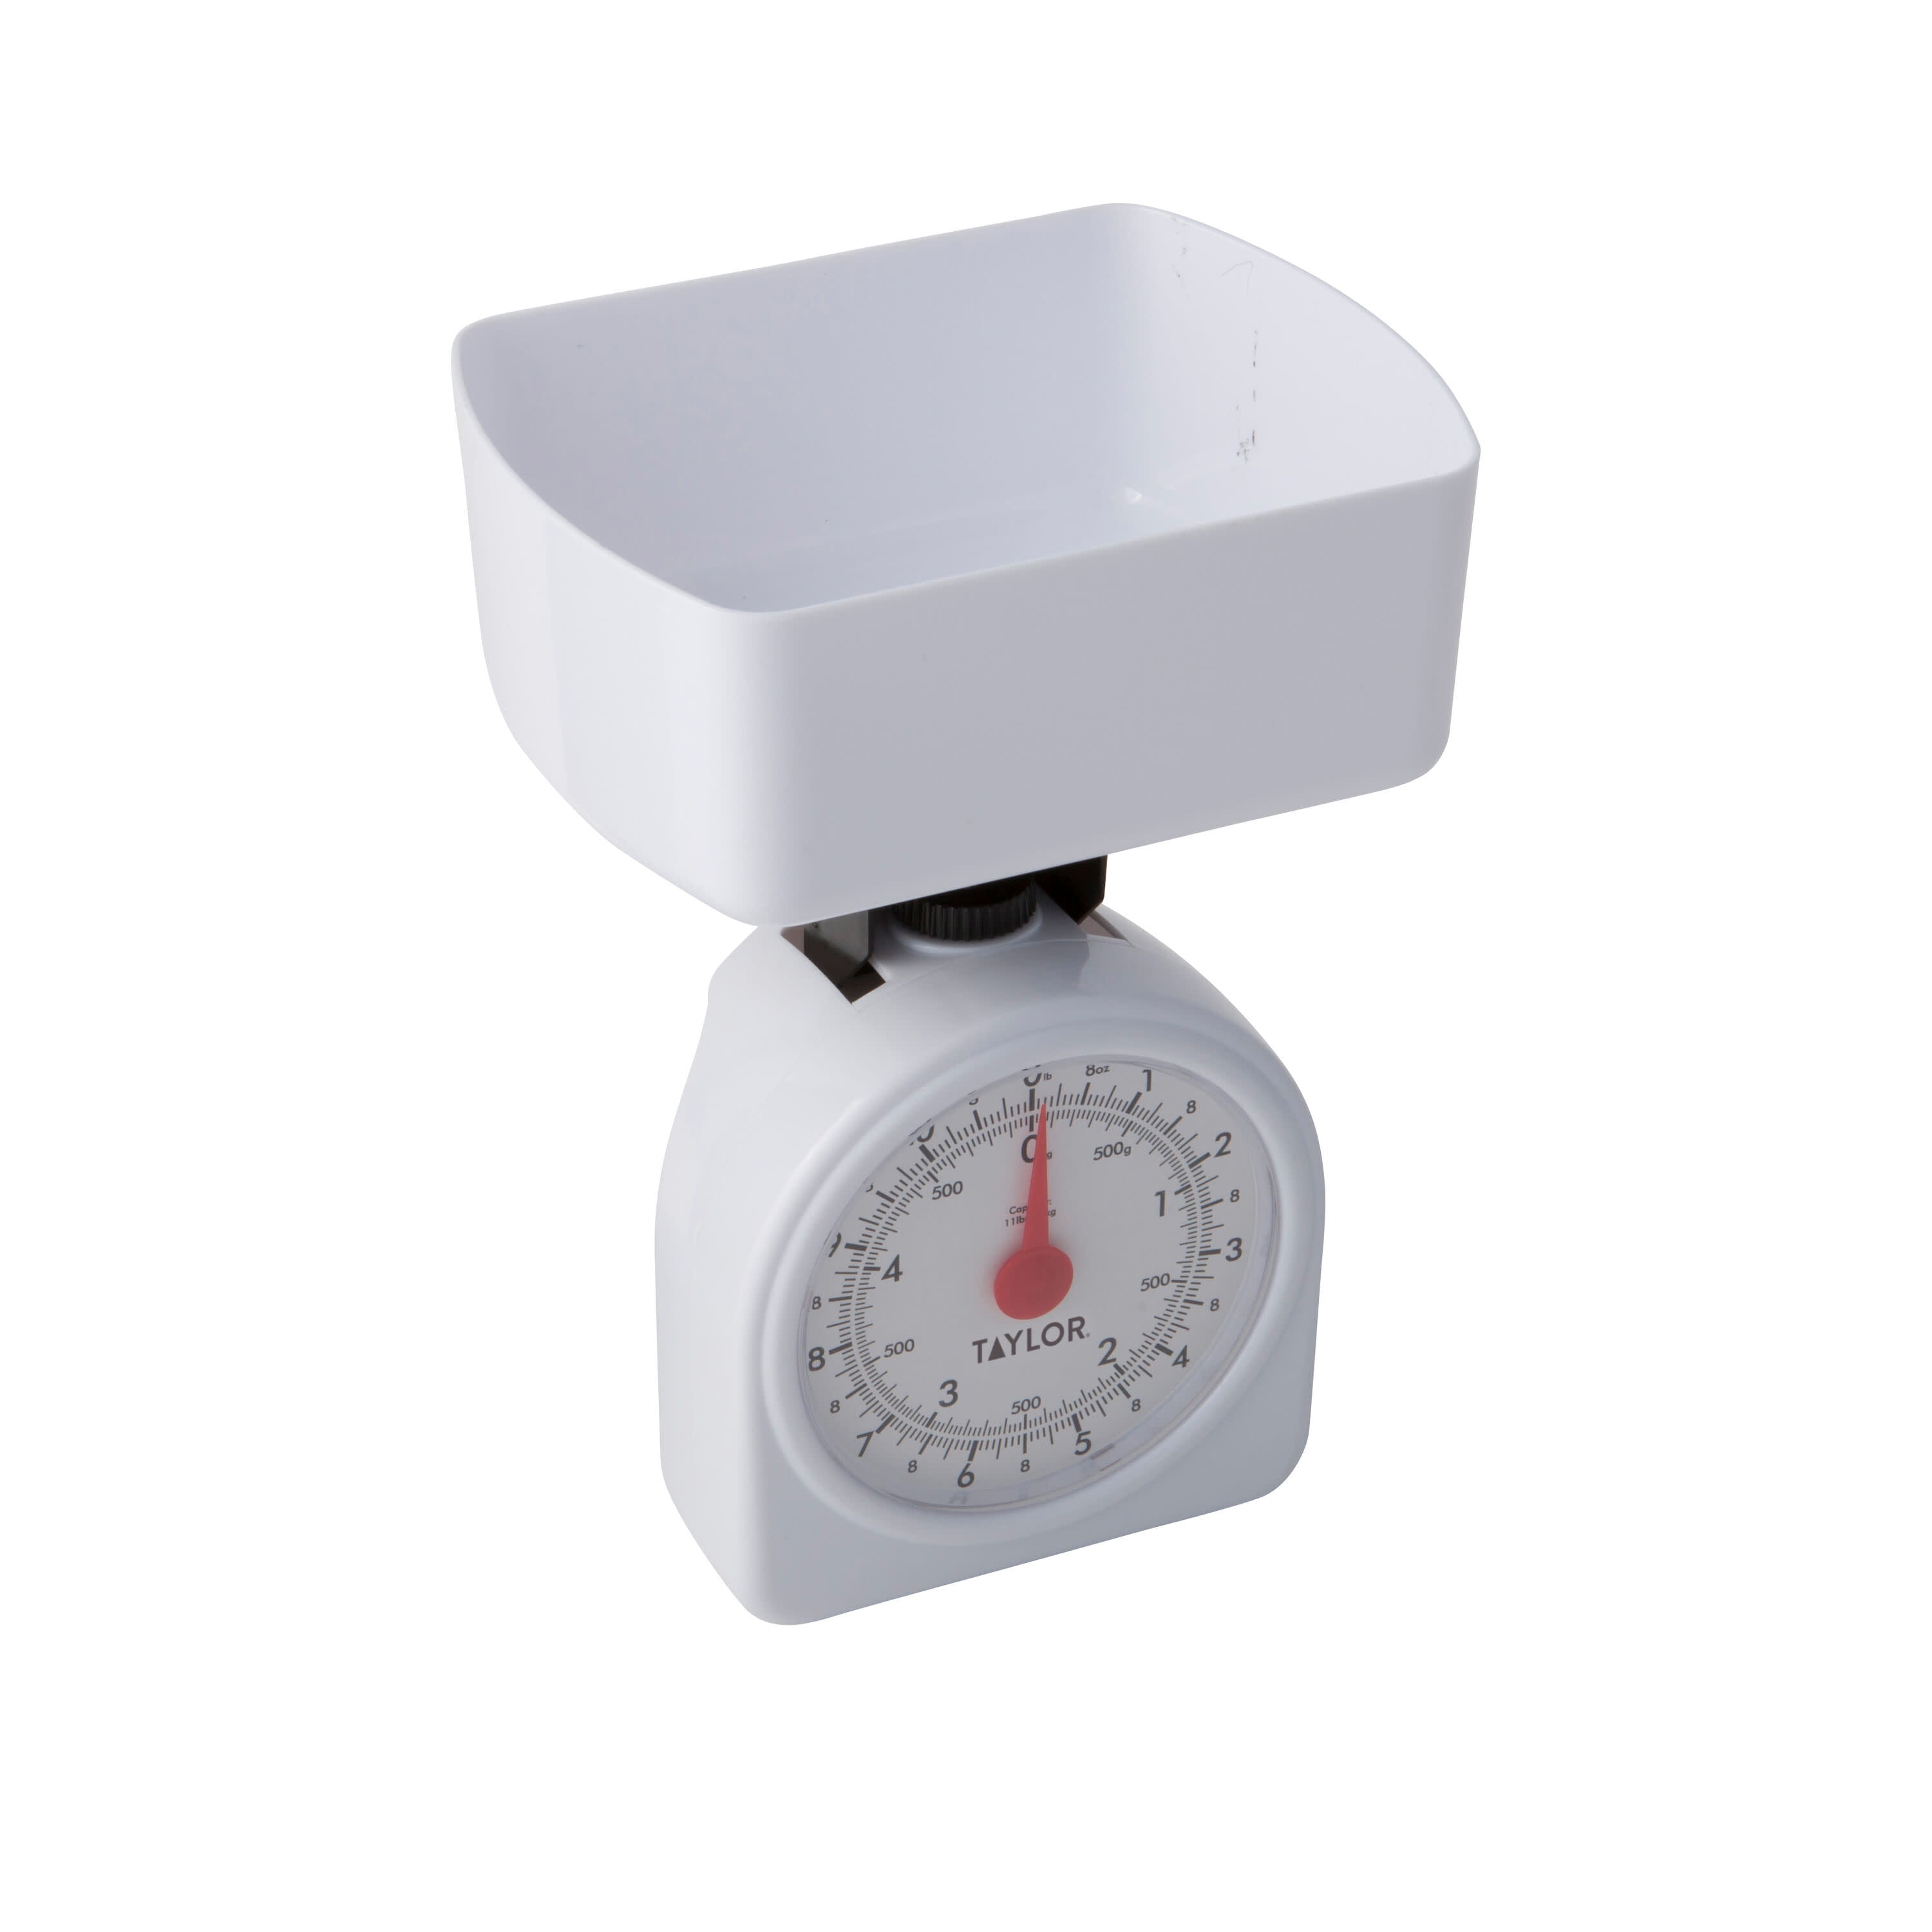 Taylor Mechanical/Analog Kitchen Scale and Food Scale in White, Max 11 Lbs.  